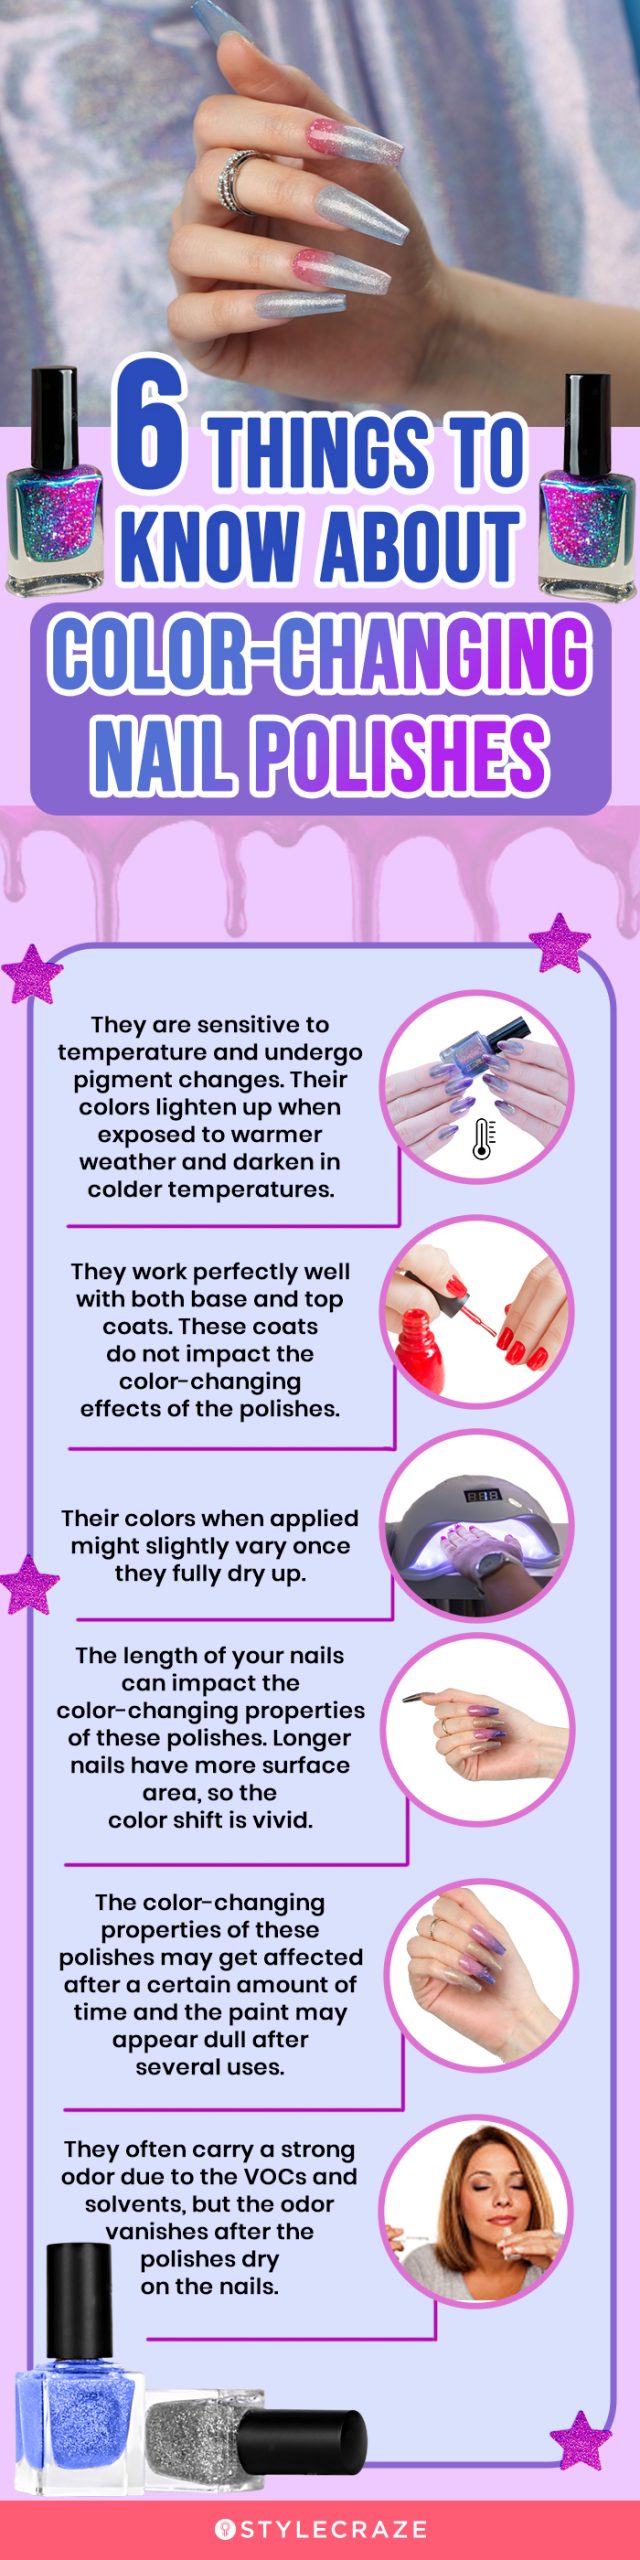 6 Things To Know About Color-Changing Nail Polishes (infographic)